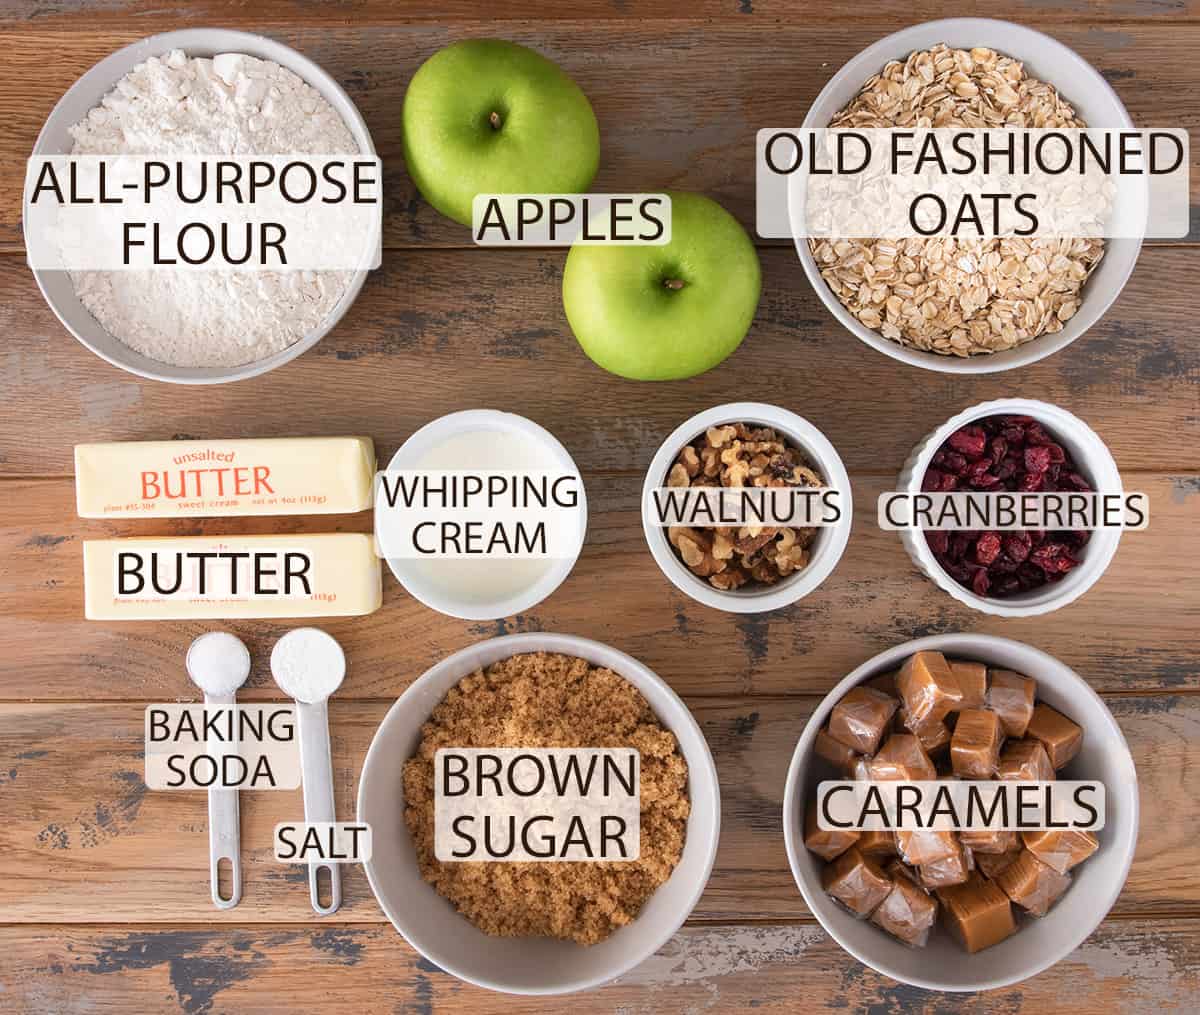 Ingredients for Apple Crumble Bars recipe laid out on table with text labels.